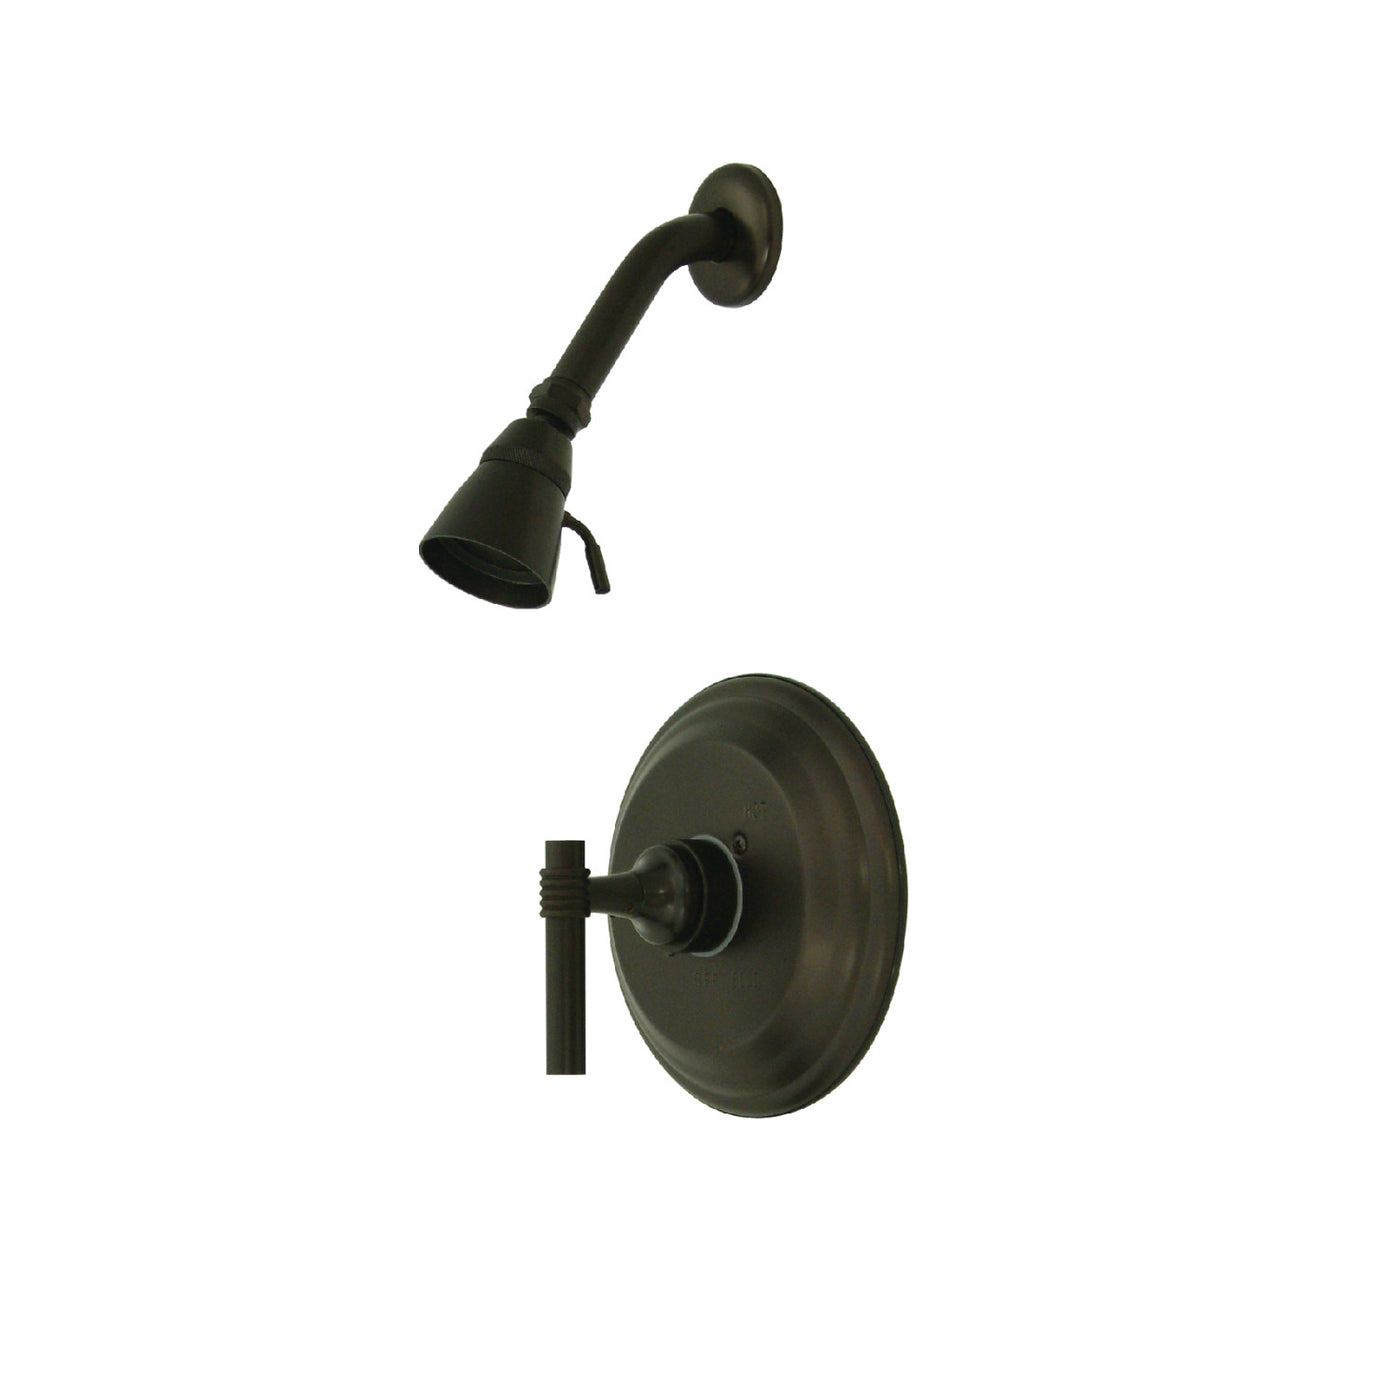 Elements of Design EB2635MLSO Shower Faucet, Oil Rubbed Bronze